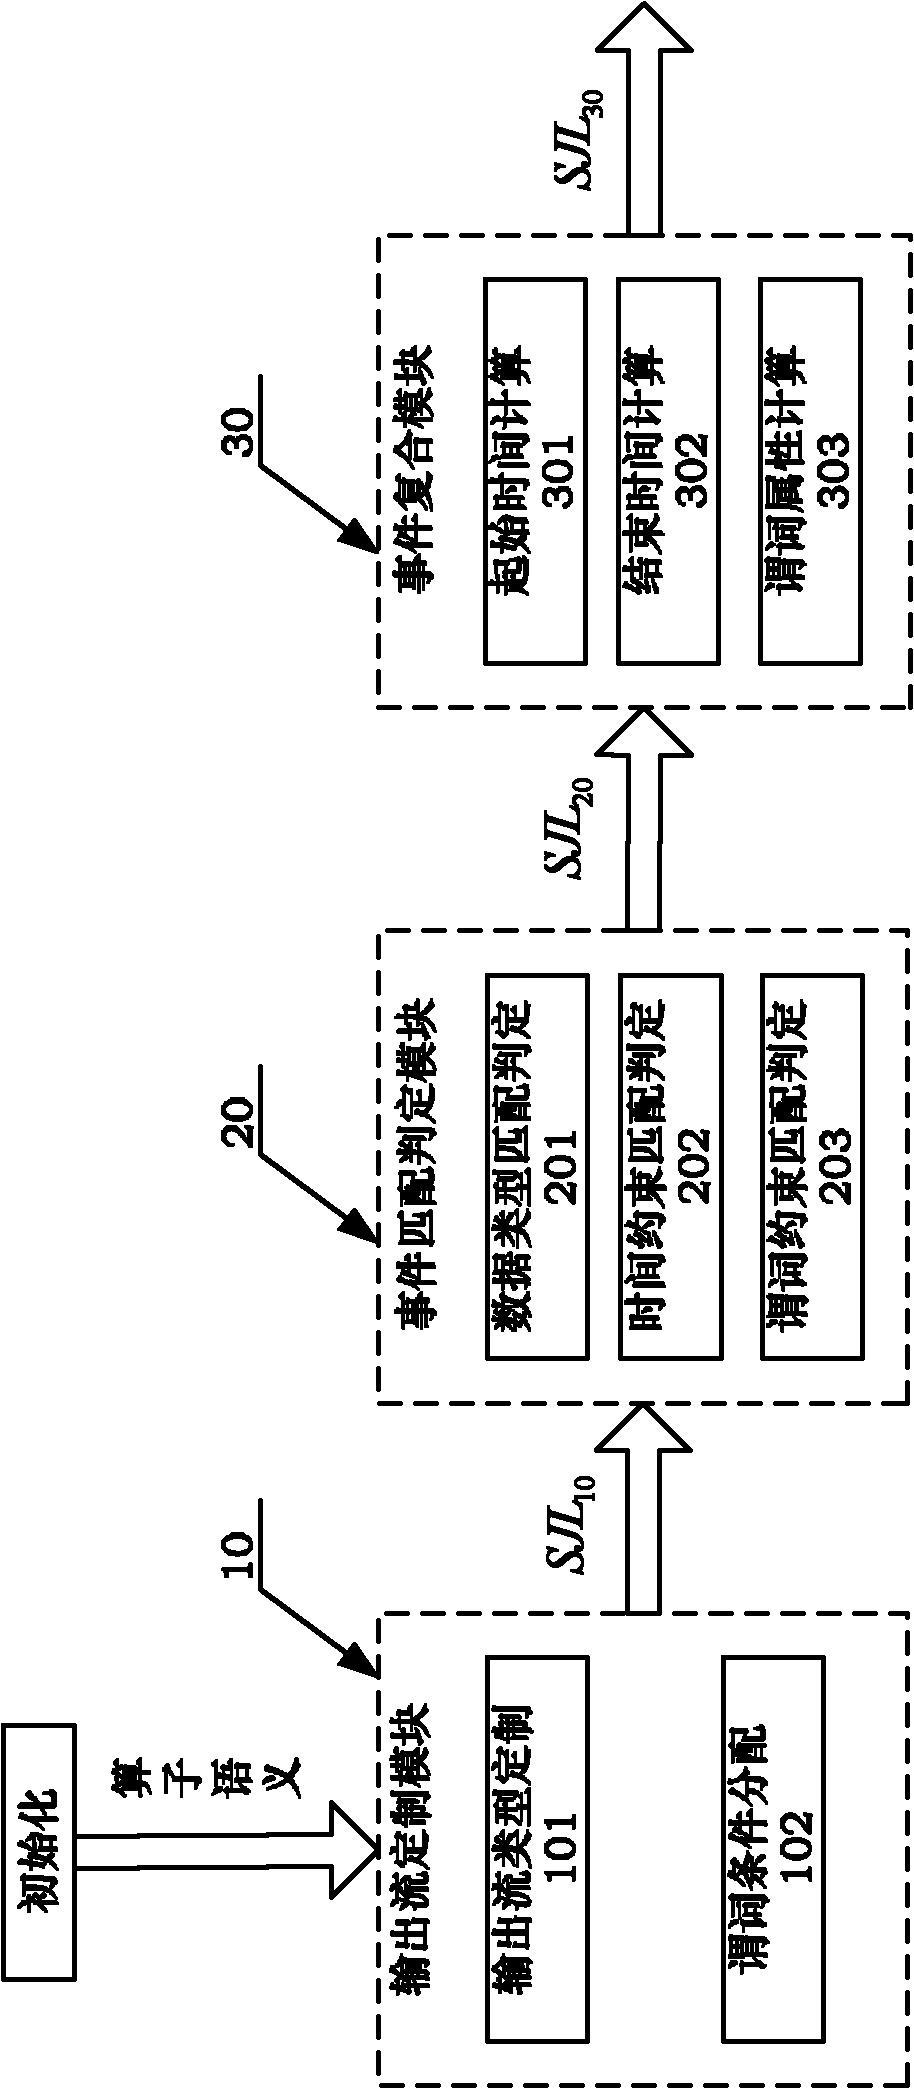 Tree complex event processing process-based operator internal processing system